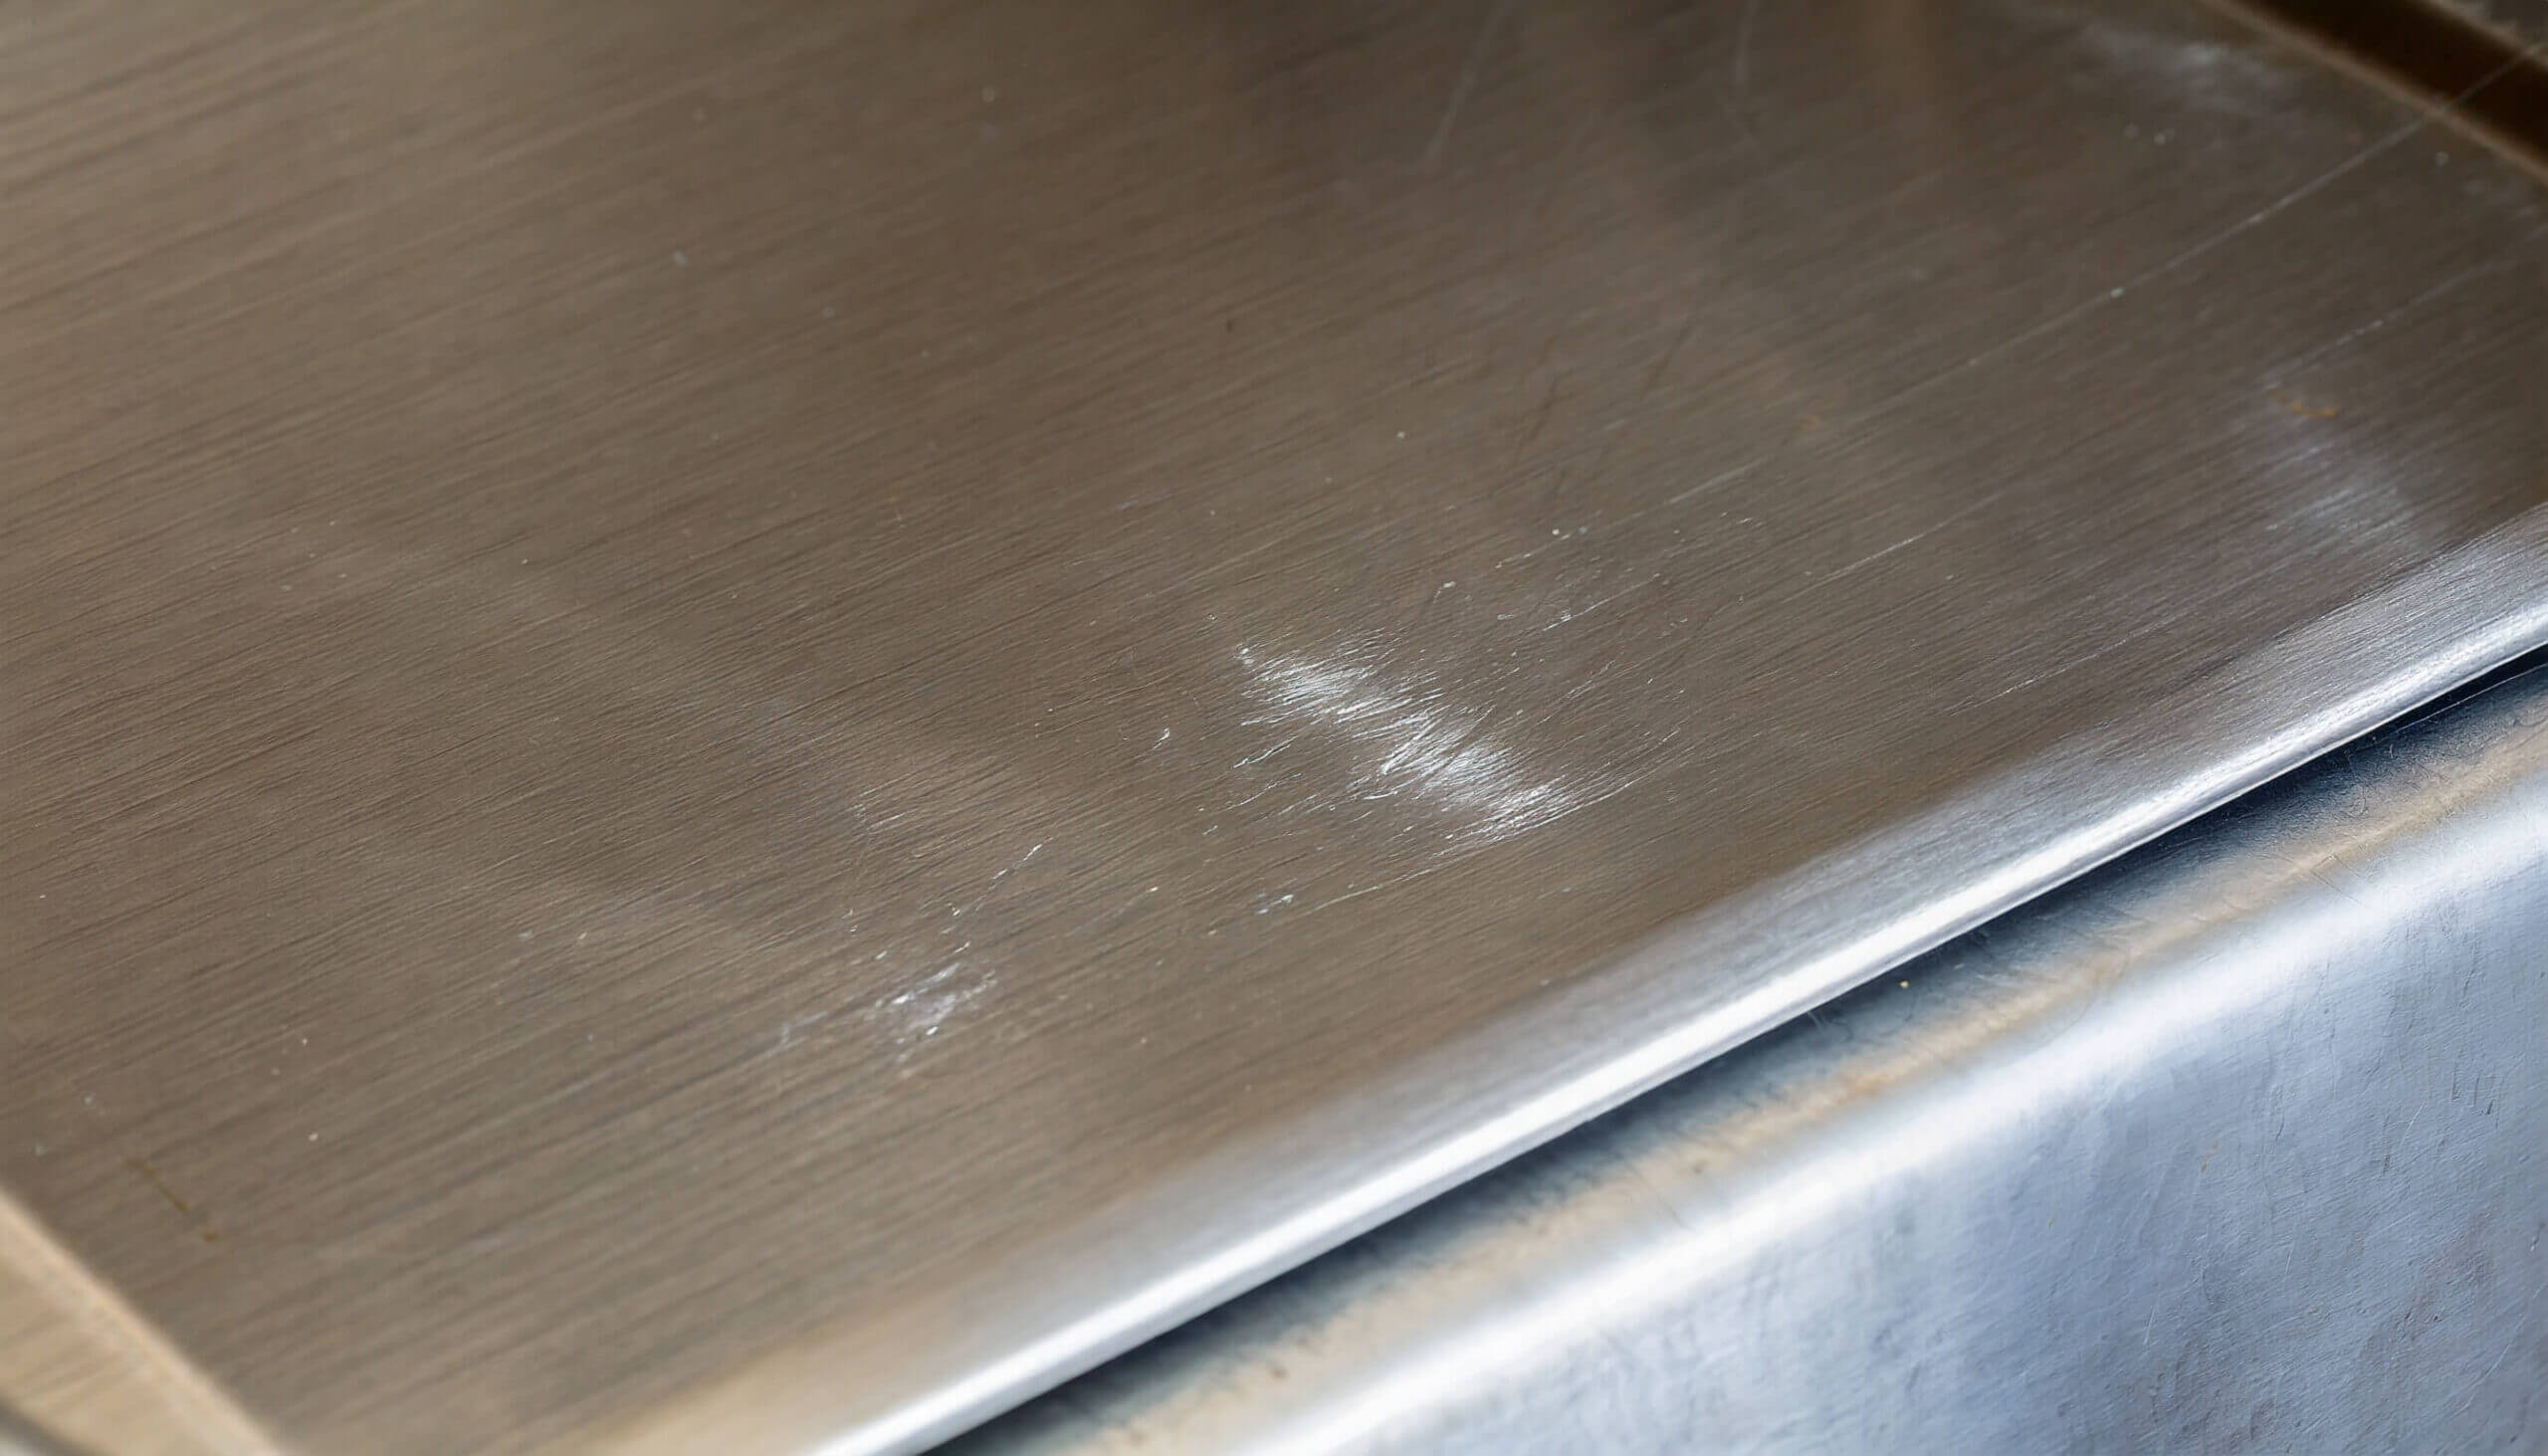 How to remove scuffs and scratches from stainless steel? : r/Appliances